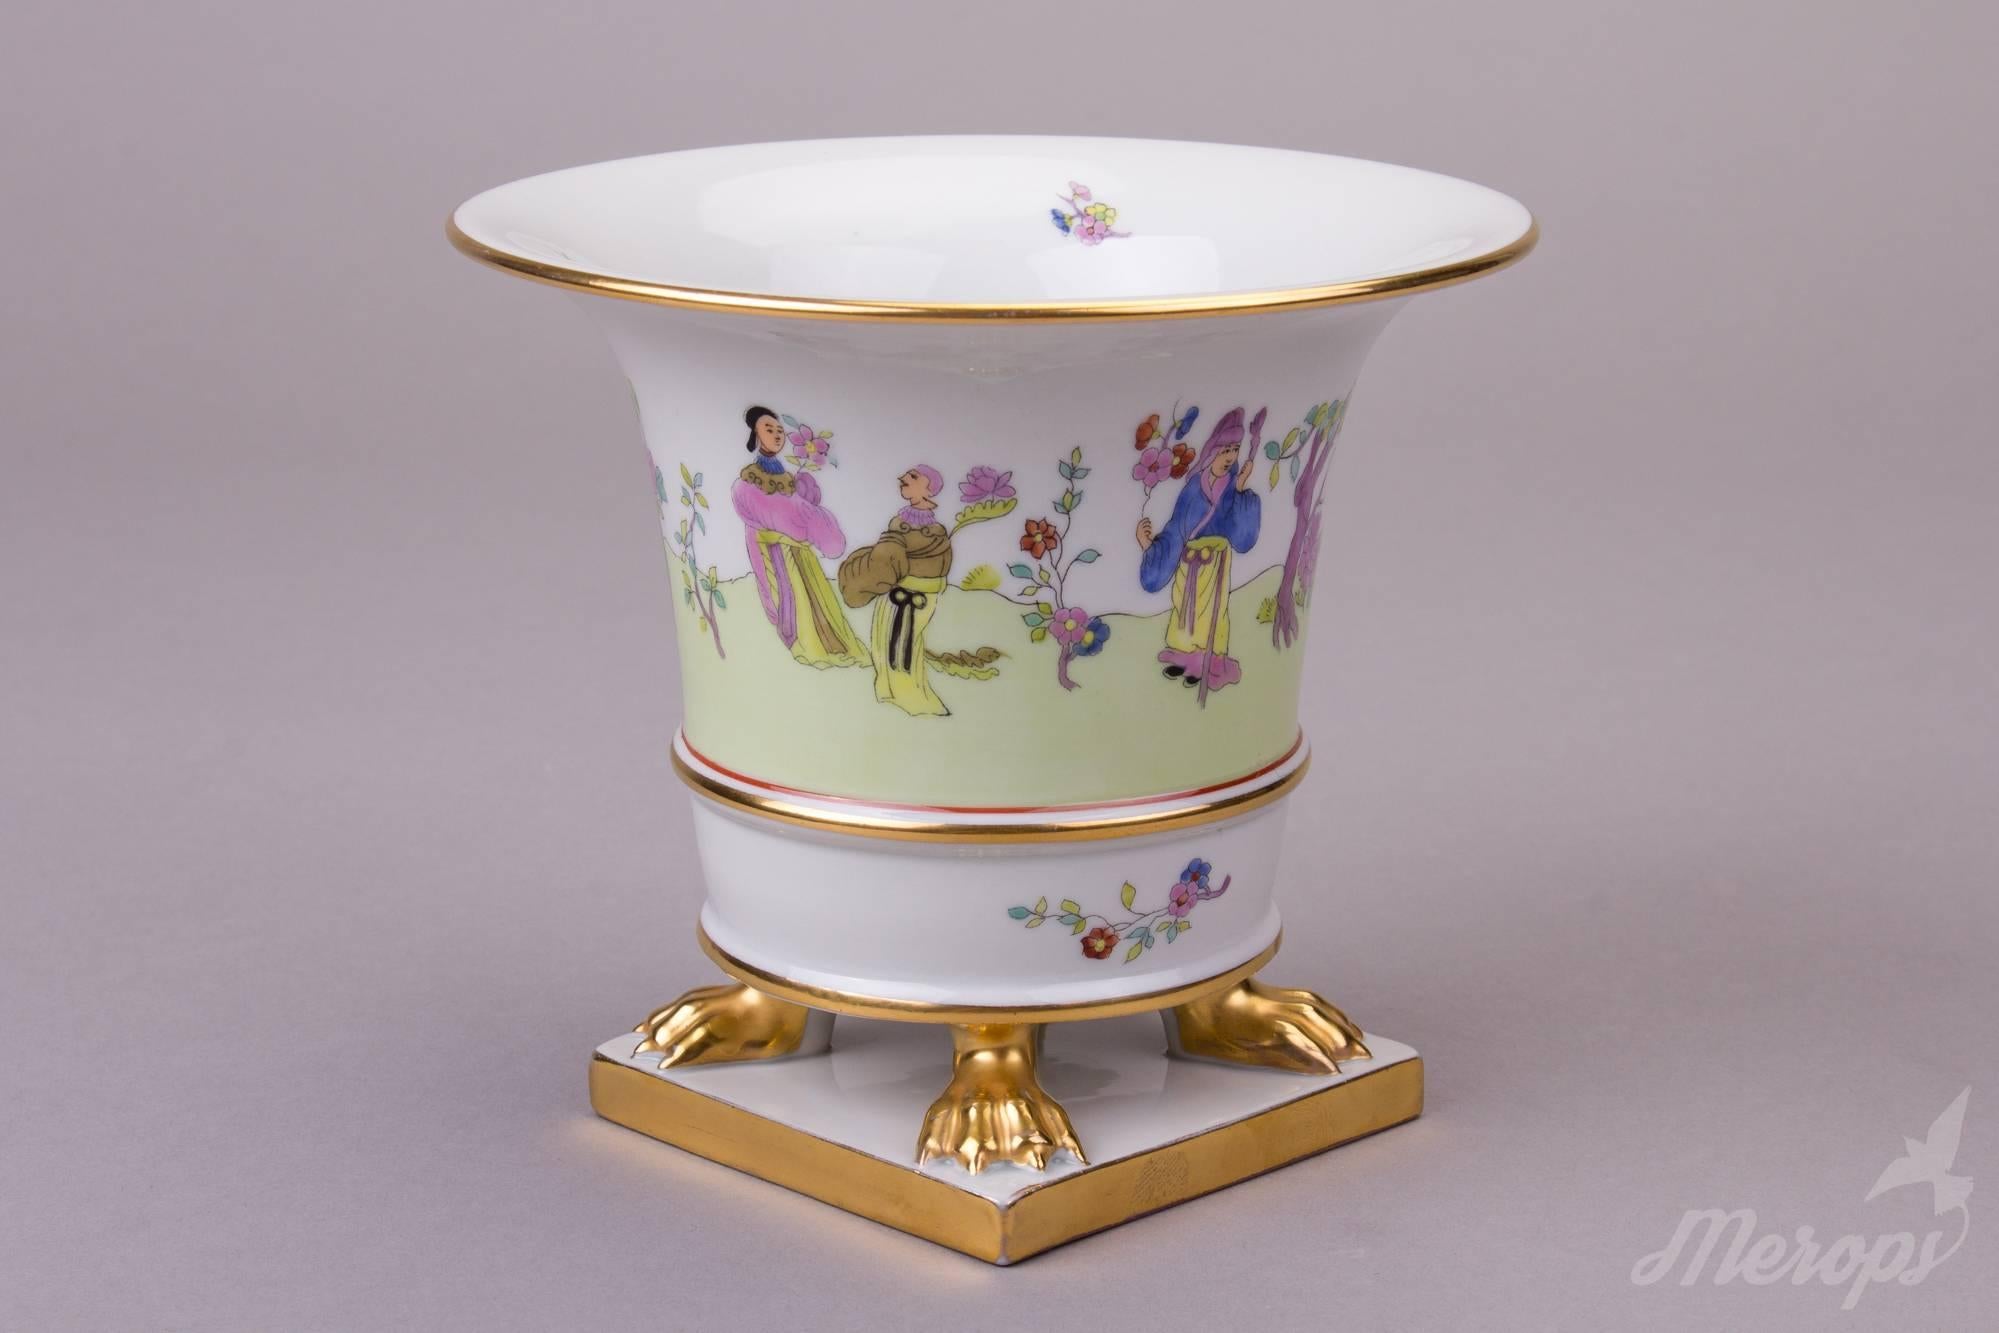 We ship this item worldwide for 35 USD with insurance. Shipping usually takes 5-10 business days.  

Manufacturer: Herend Porcelain Manufactory (Hungary)
Quality: Handpainted, 1st class
Pattern: Csung Vert
Condition: Pre-owned, in excellent